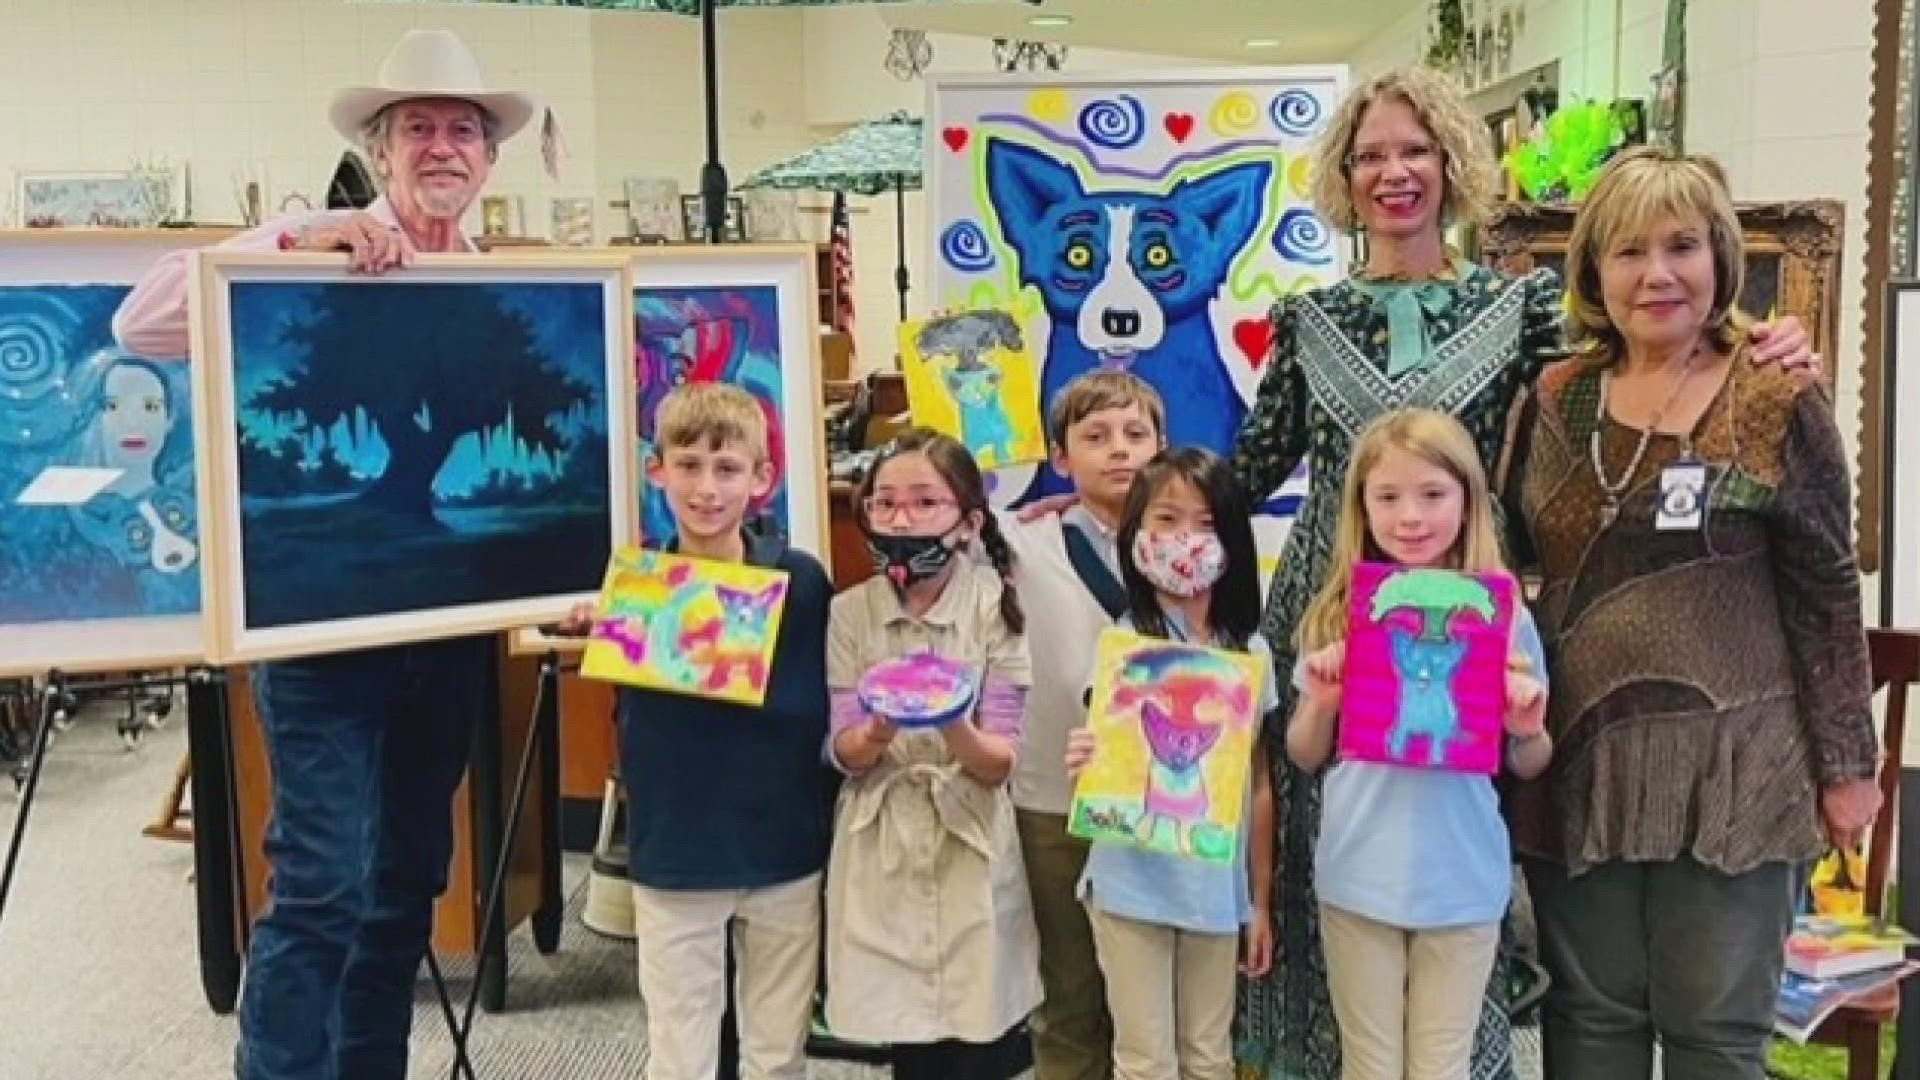 Wendy Rodrigue, the widow of Blue Dog artist George Rodrigue, goes on a tour of south Louisiana to inspire young artists.